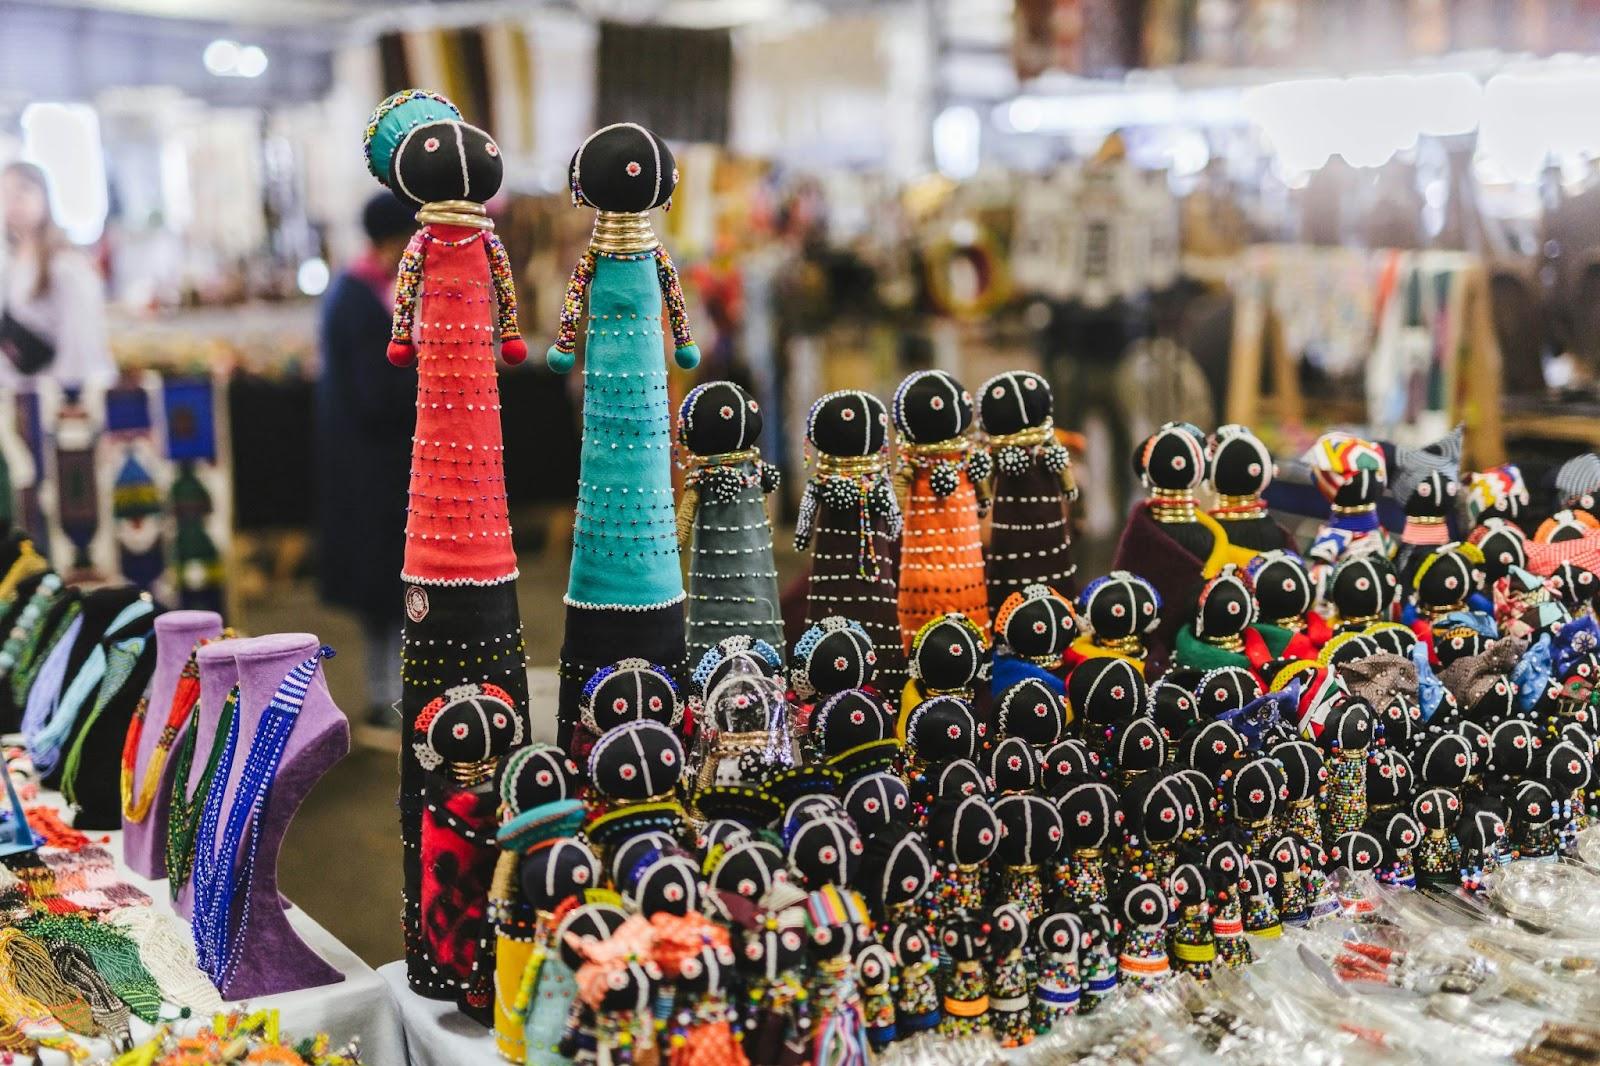 Beautiful African dolls available at Rosebank African Craft Market